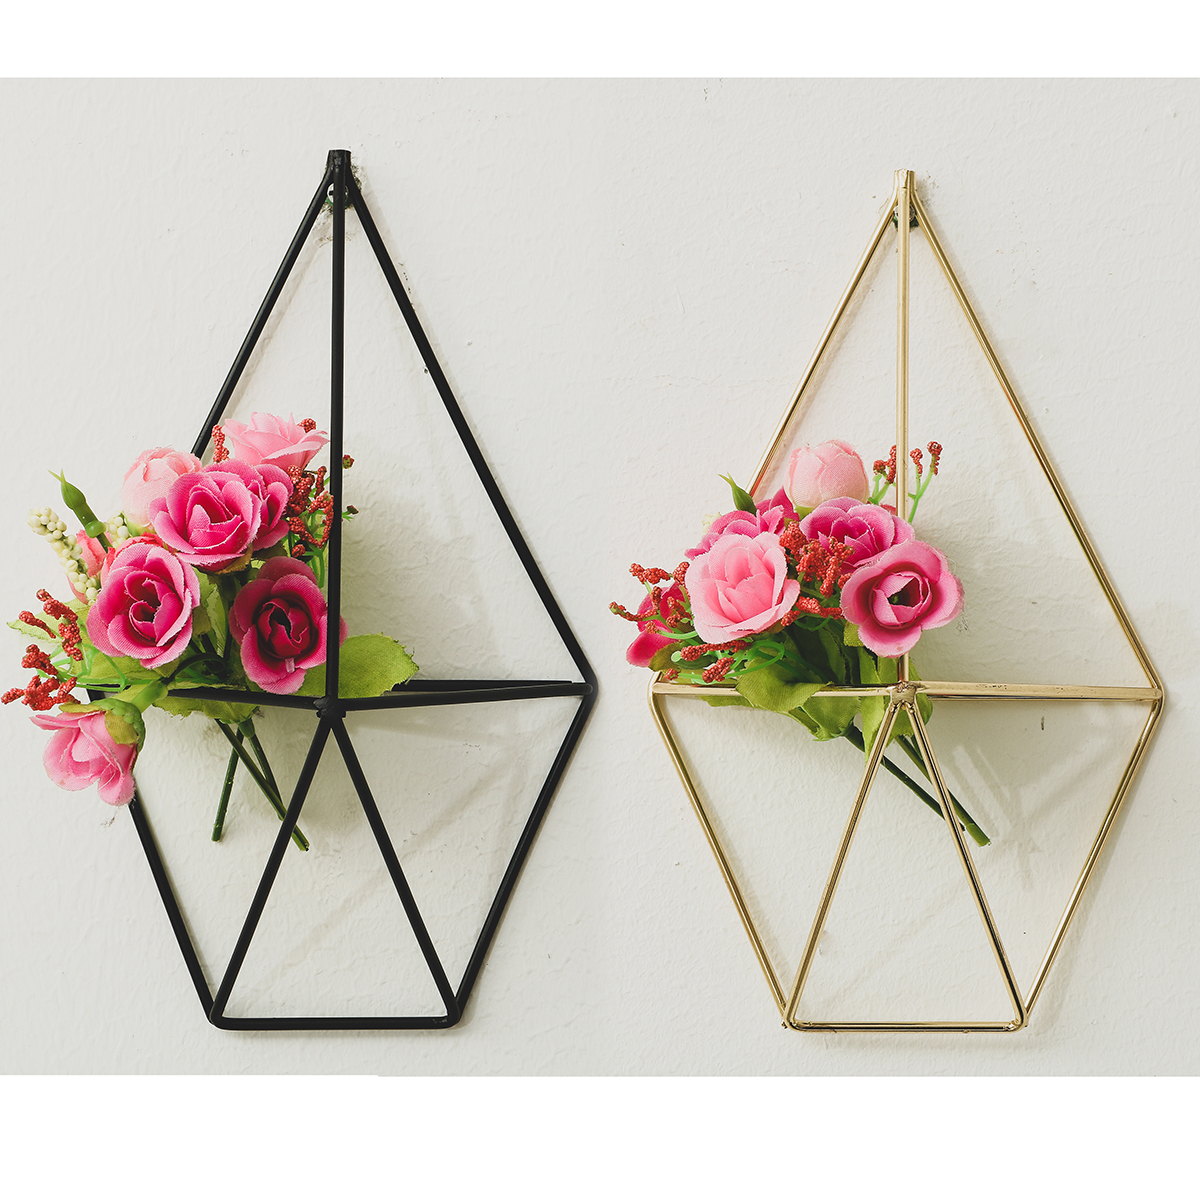 2-Pcs-Wall-Mounted-Geometric-Flower-Stand-Wall-Hanging-Wrought-Iron-Plant-Storage-Rack-Holder-Home-O-1736564-7